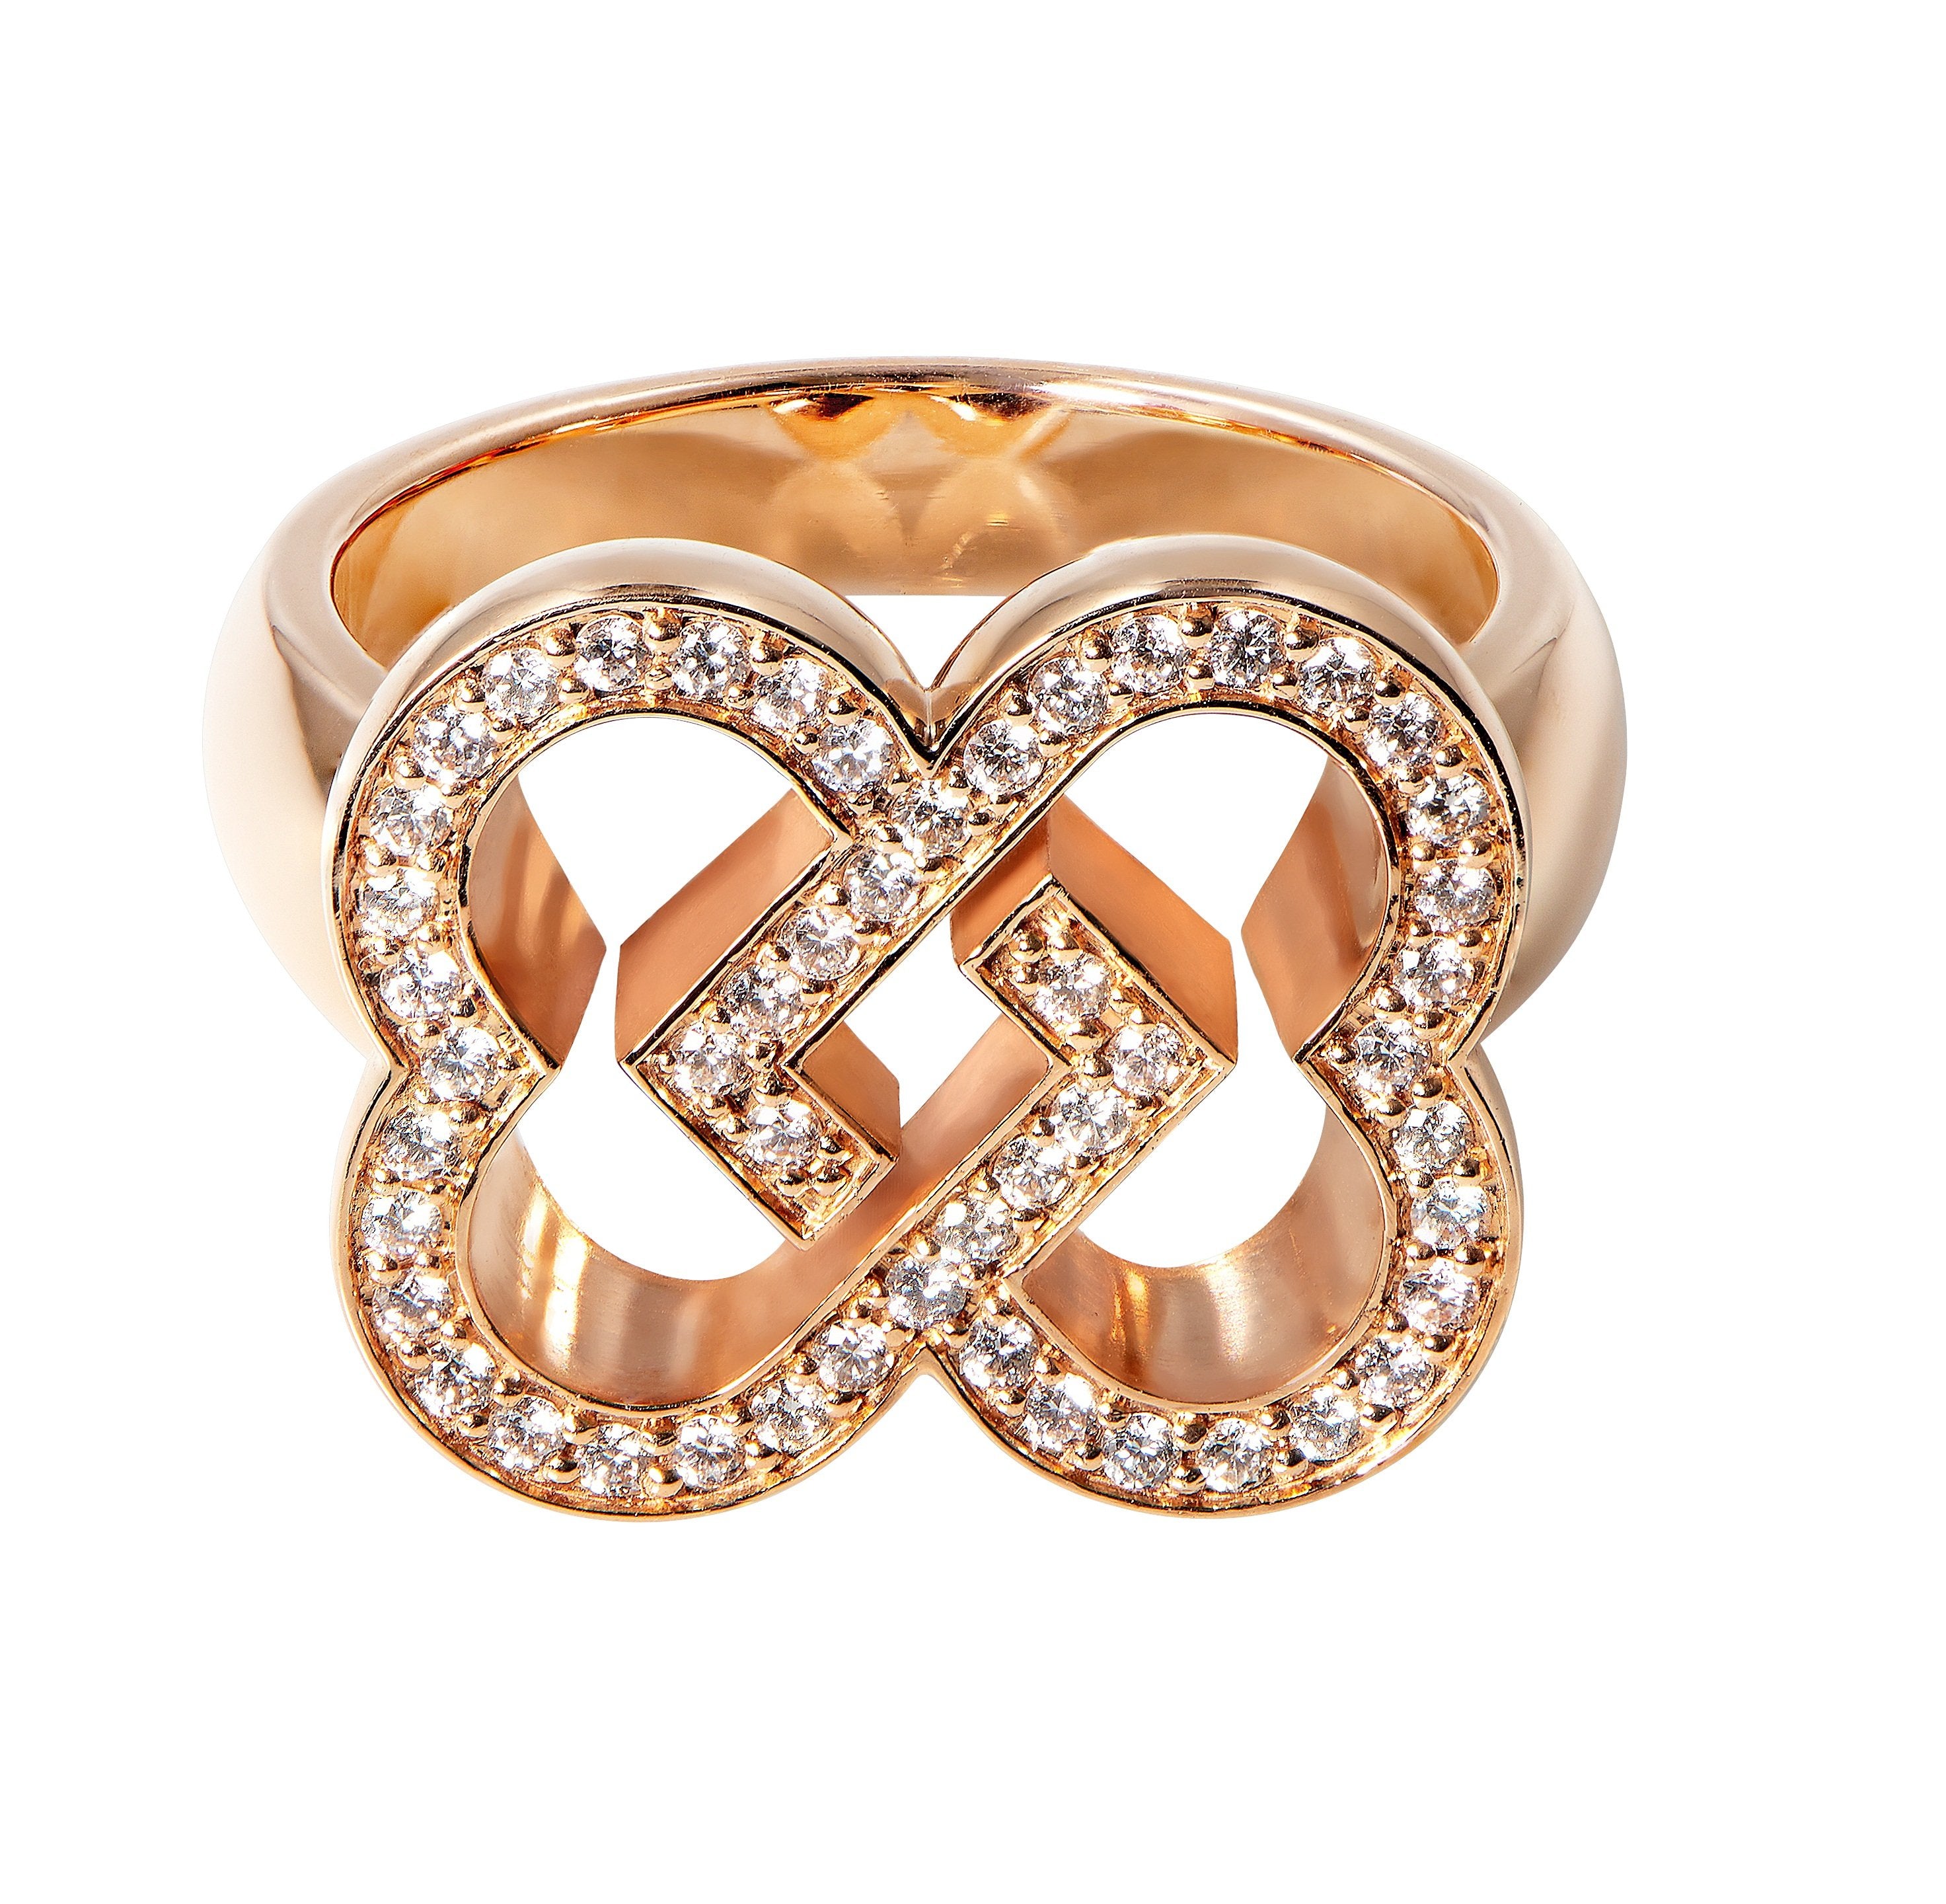 Little Love Ring in pink gold with diamonds